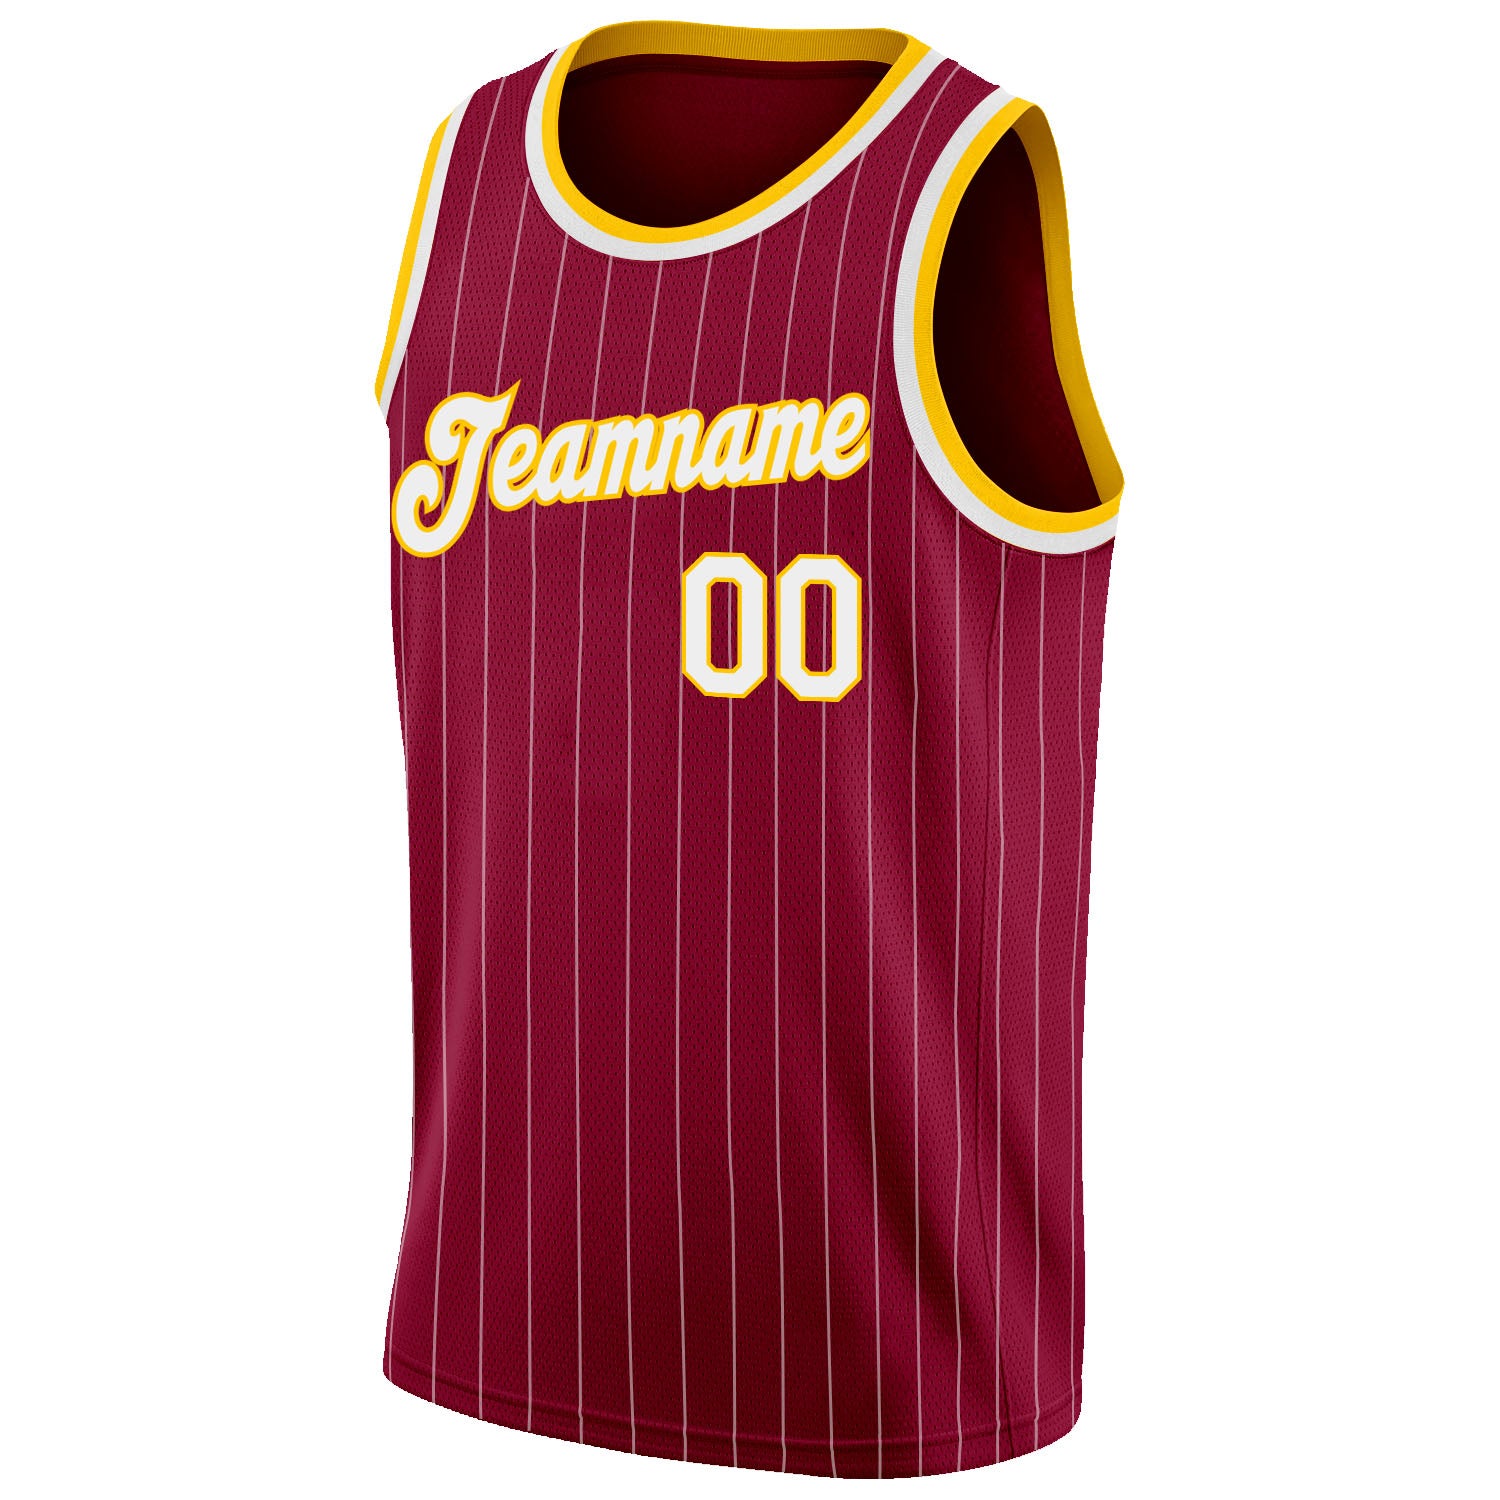 Cheap Custom White Brown Pinstripe Brown-Gold Authentic Basketball Jersey  Free Shipping – CustomJerseysPro